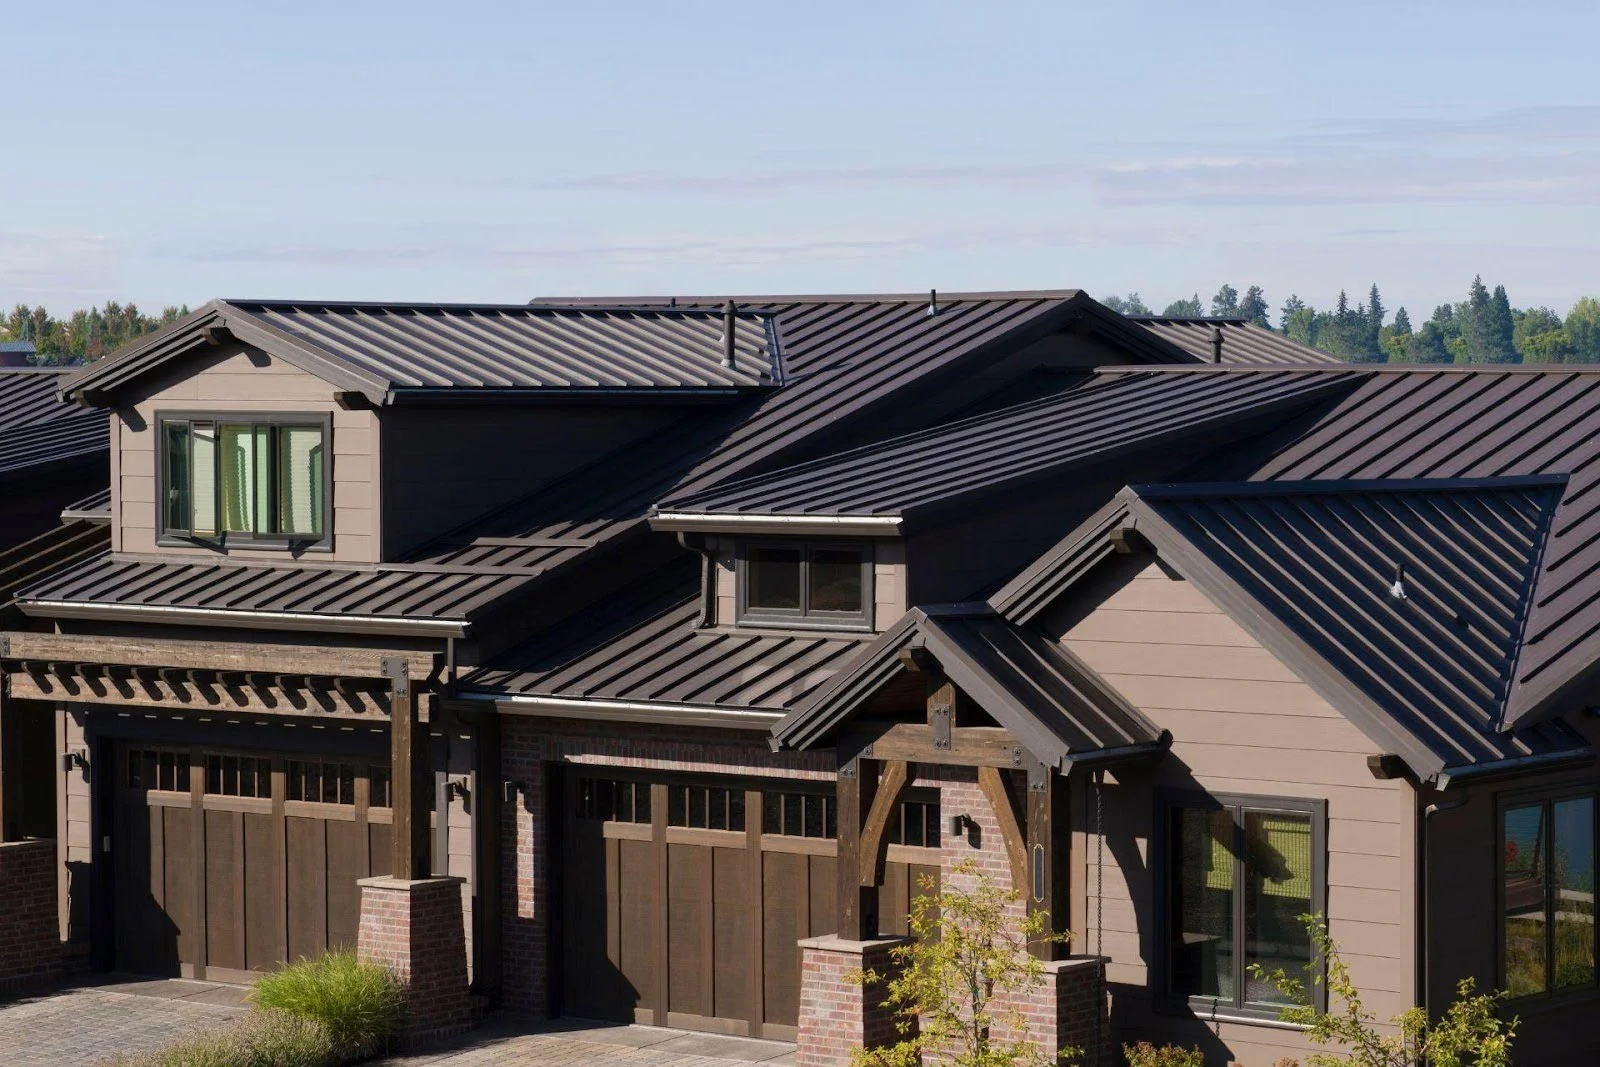 A house with an energy-efficient metal roofing system.